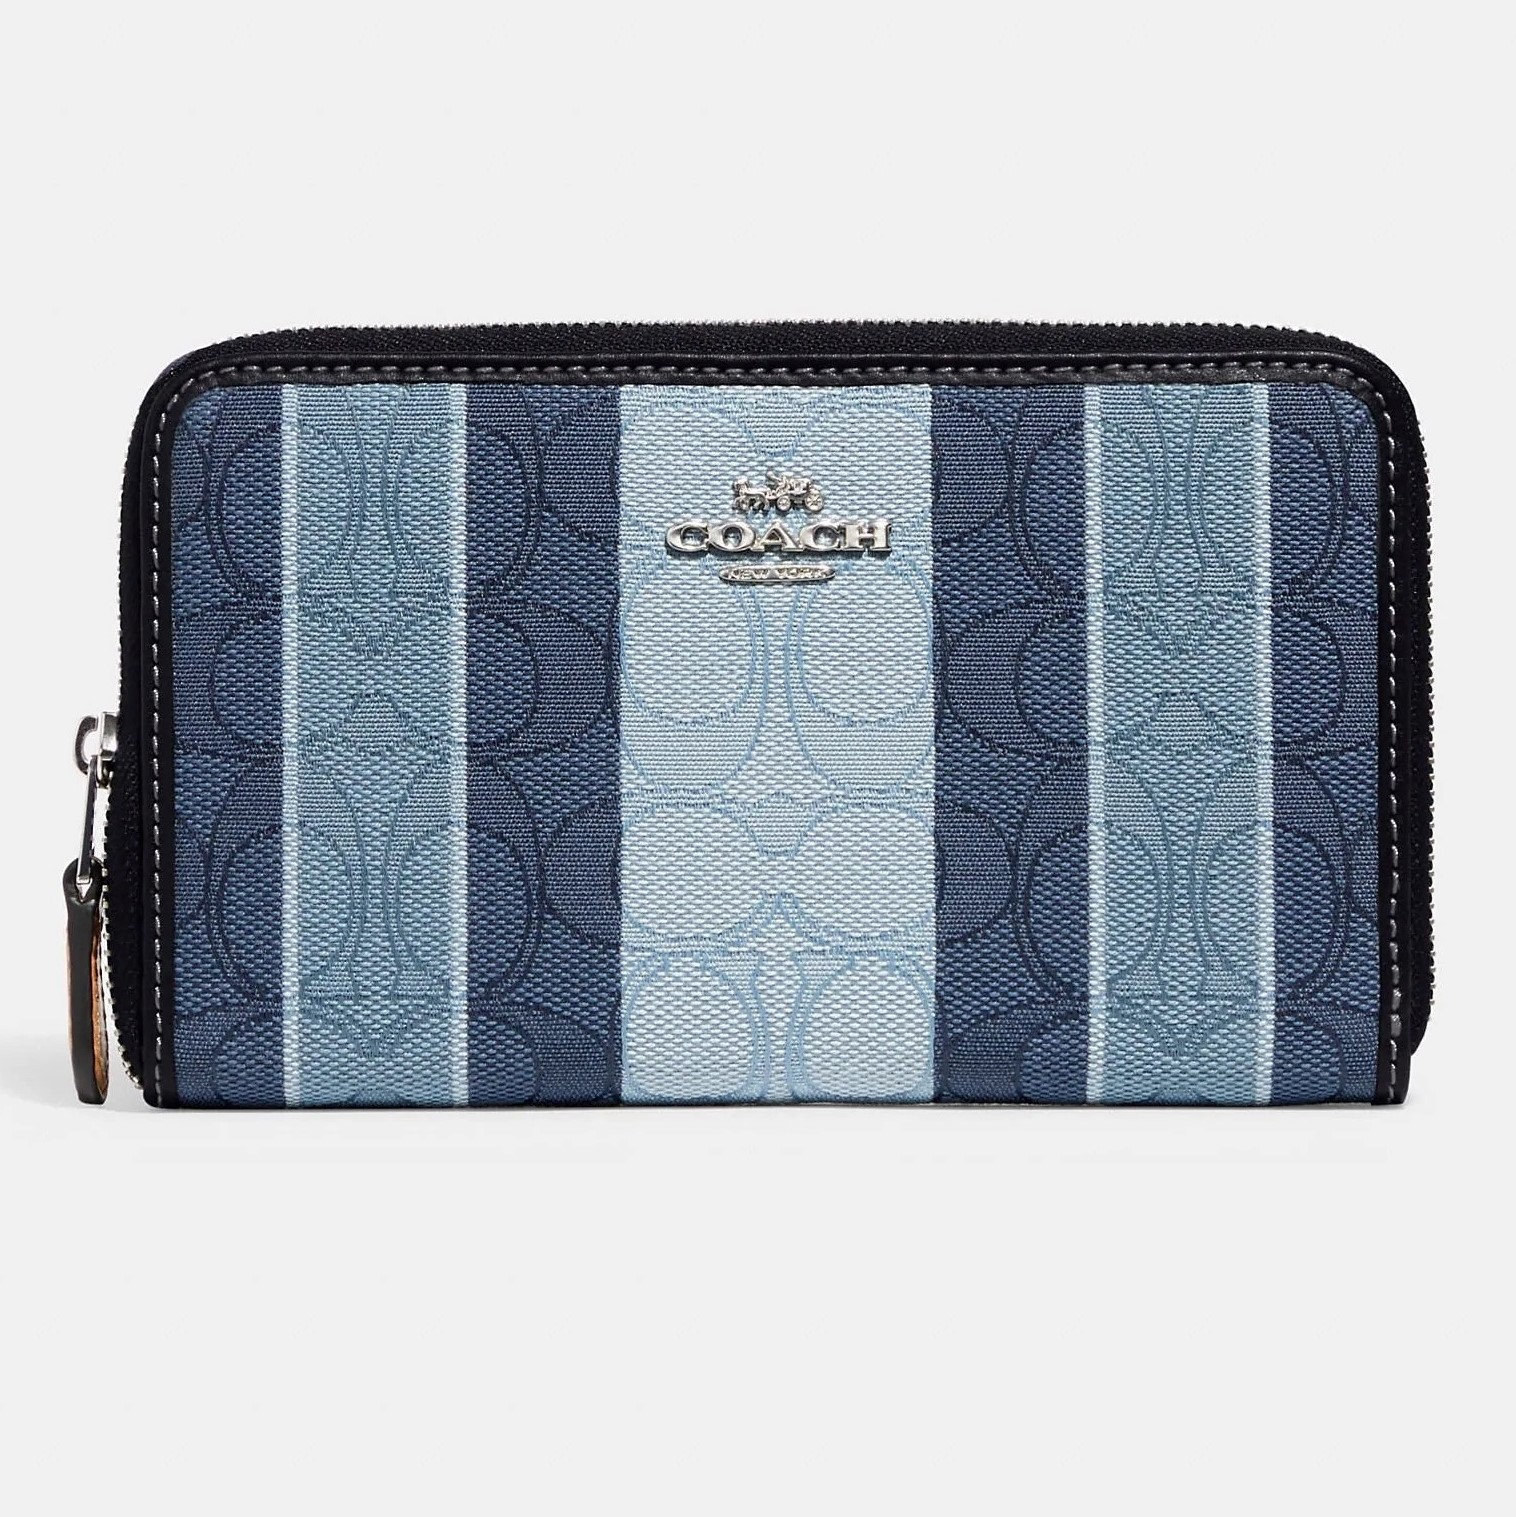 VÍ COACH NỮ MEDIUM ID ZIP WALLET IN SIGNATURE JACQUARD WITH STRIPES 10